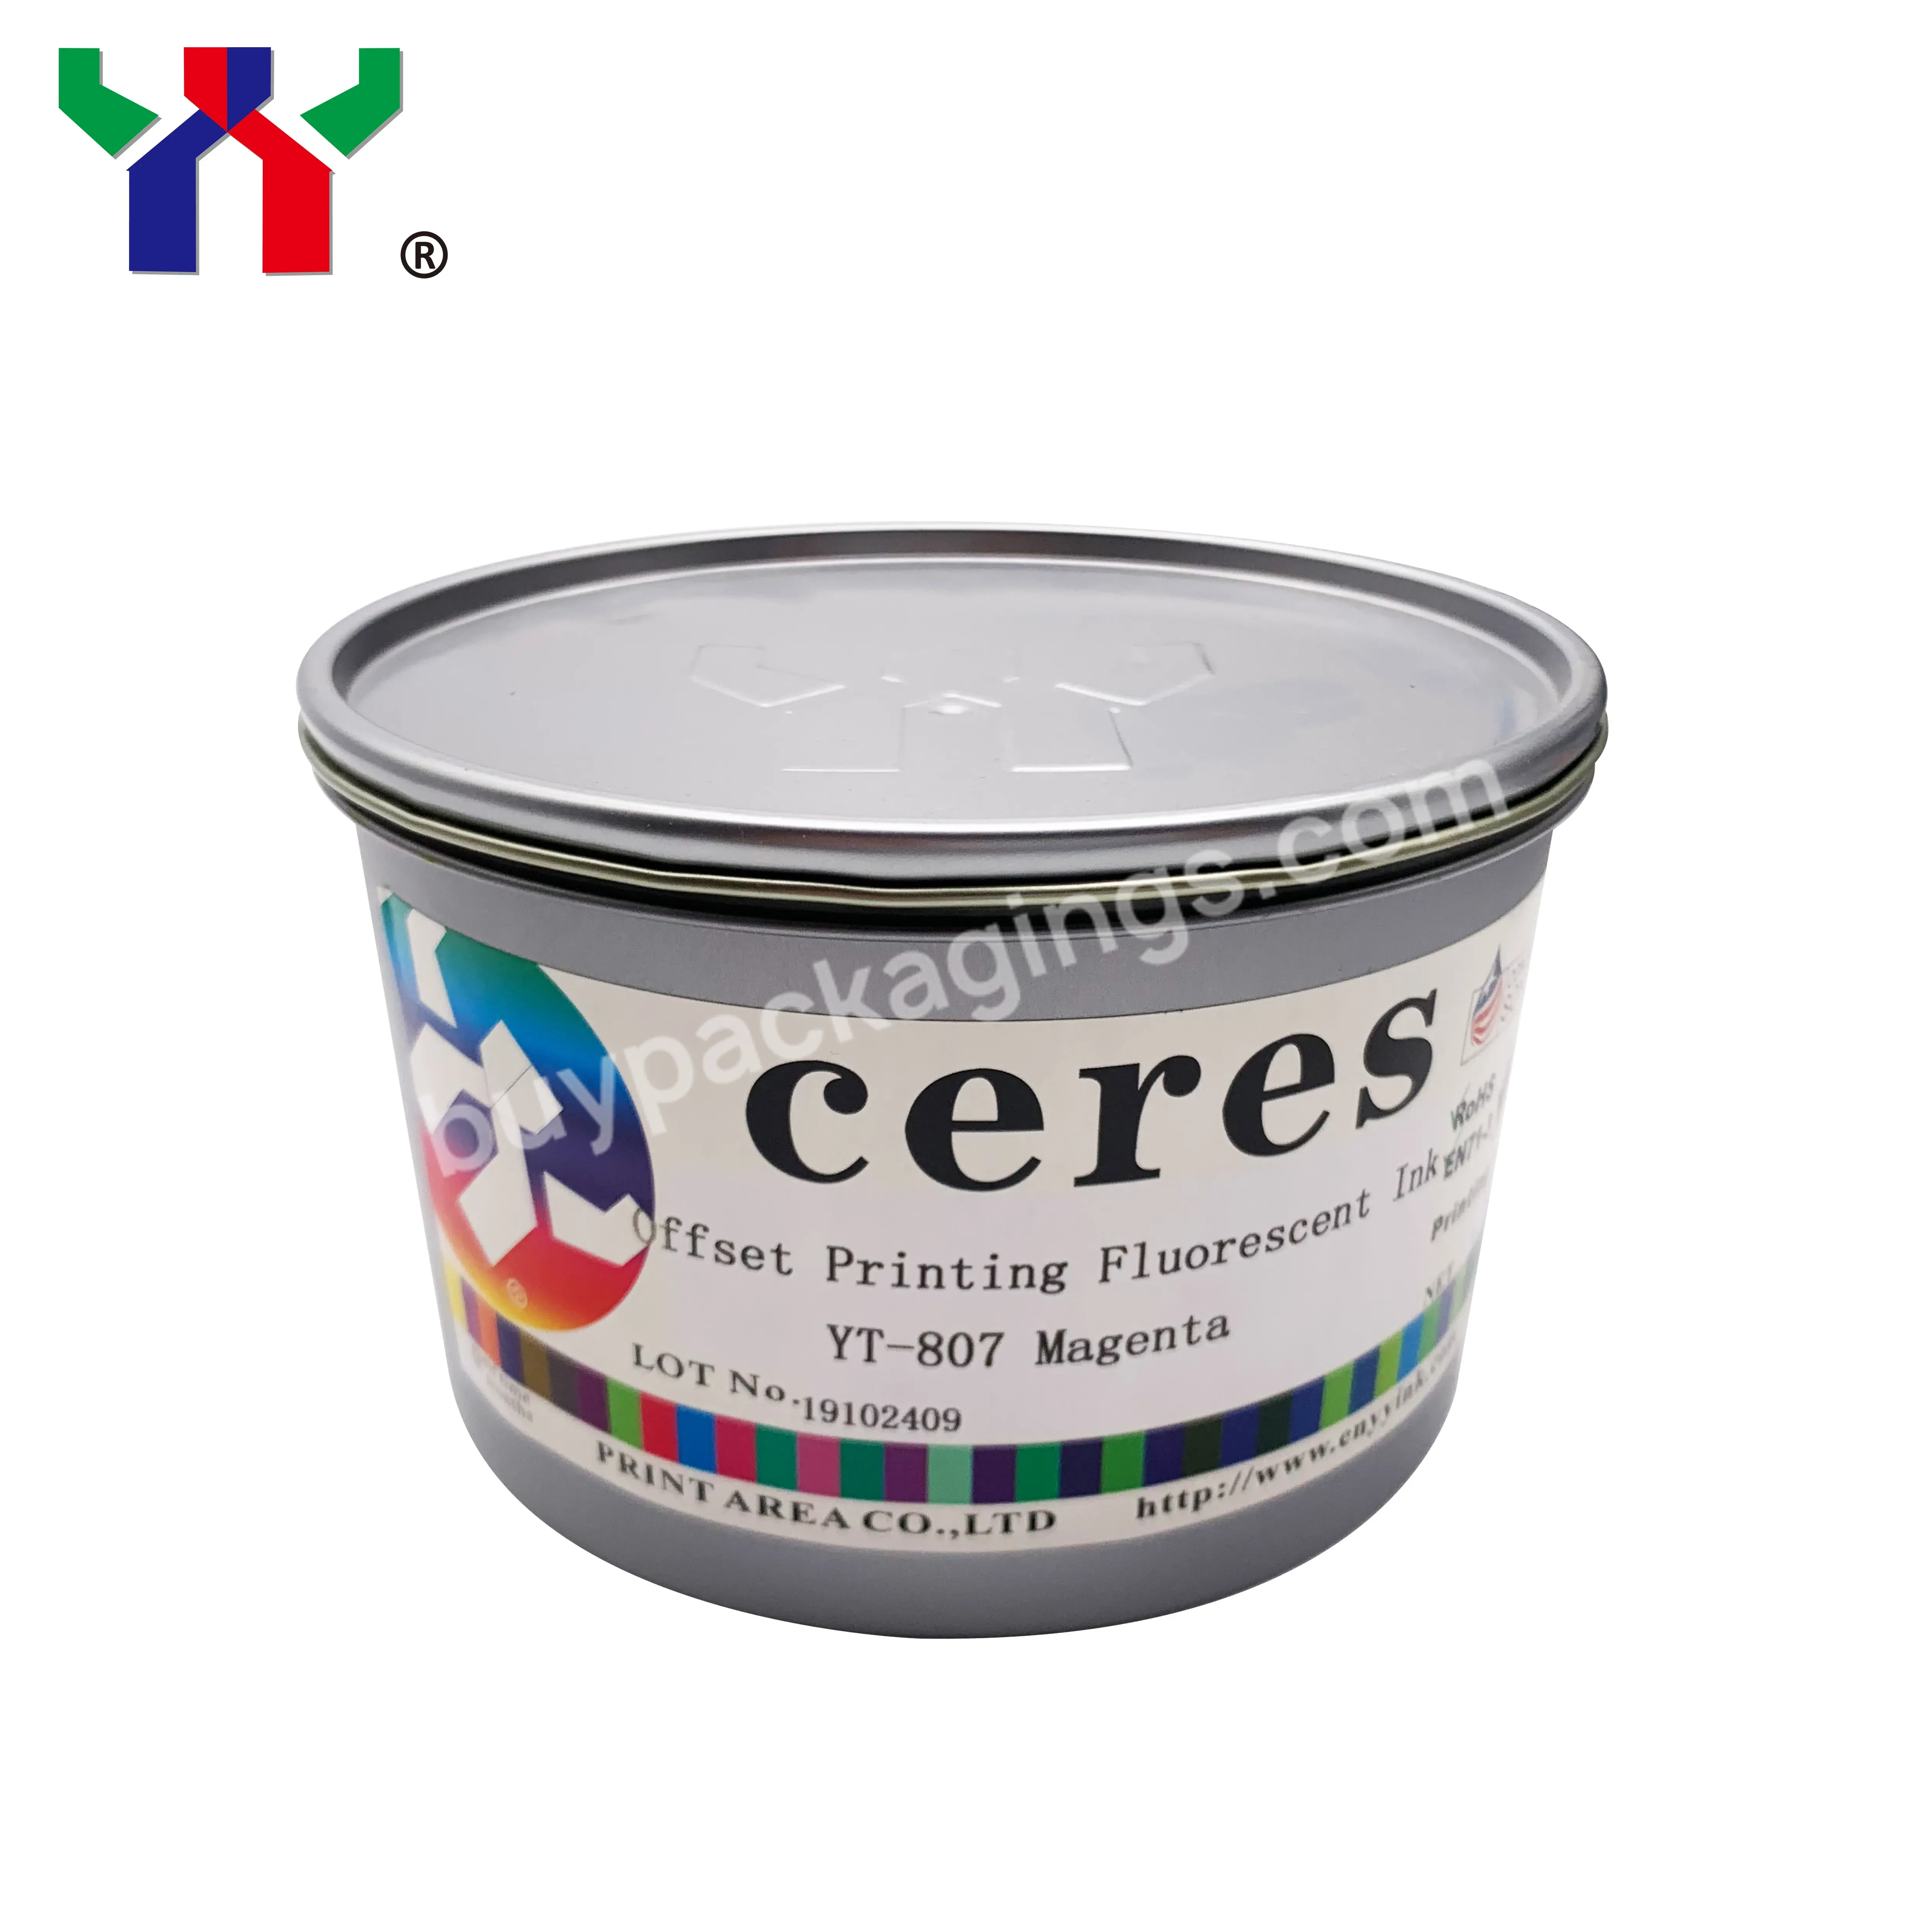 High Quality Ceres Uv Offset Printing Fluorescent Ink,Uv Dry